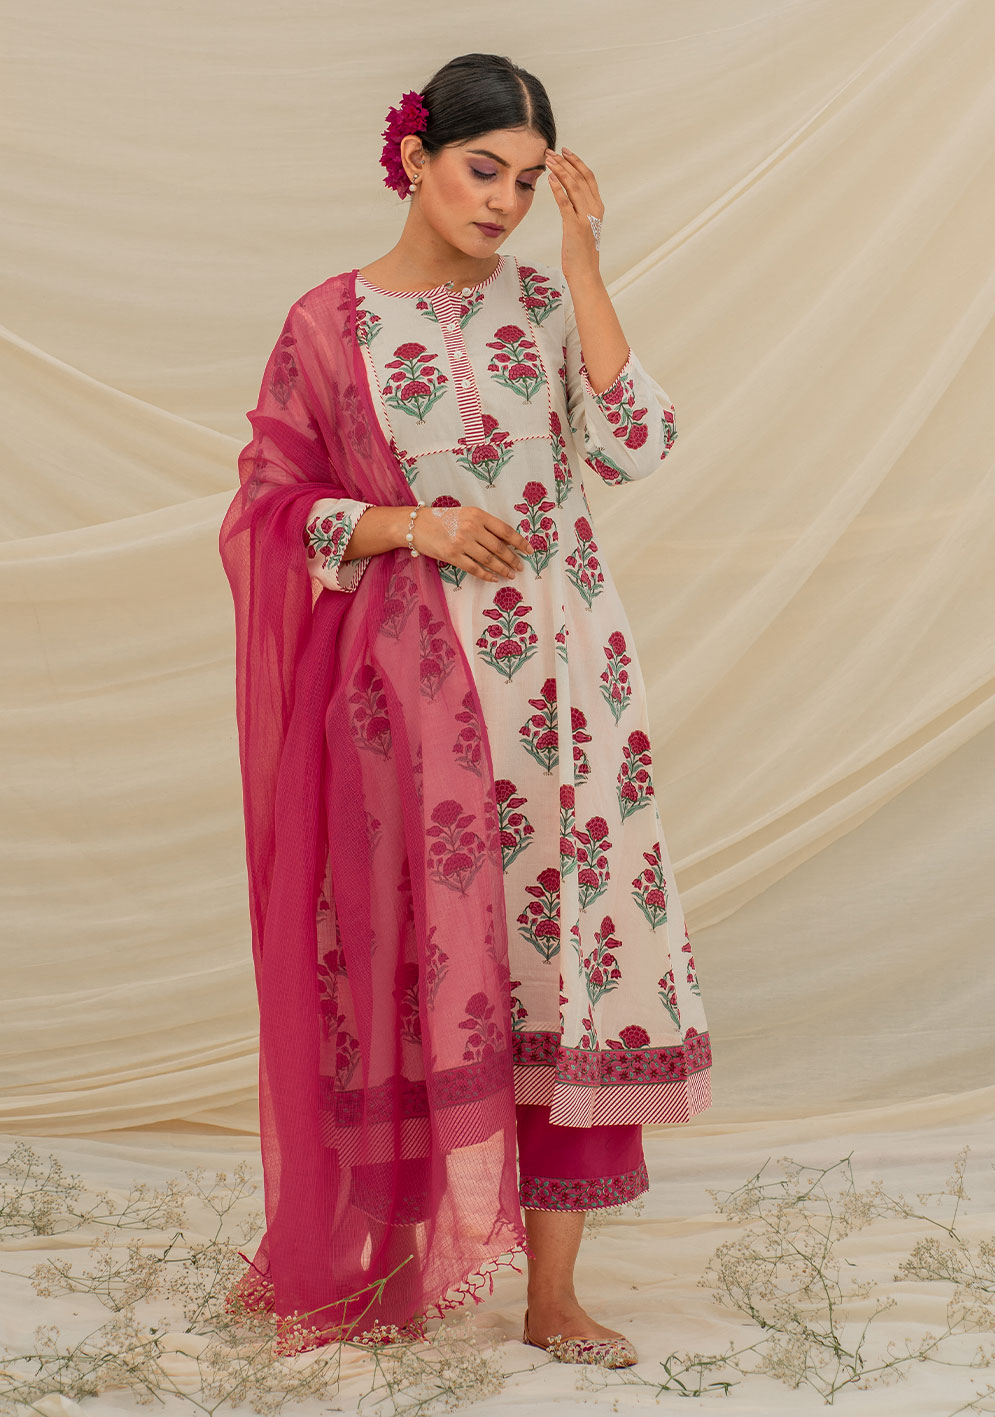 Jaipur Pink - Handcrafted Is The Ultimate Luxury